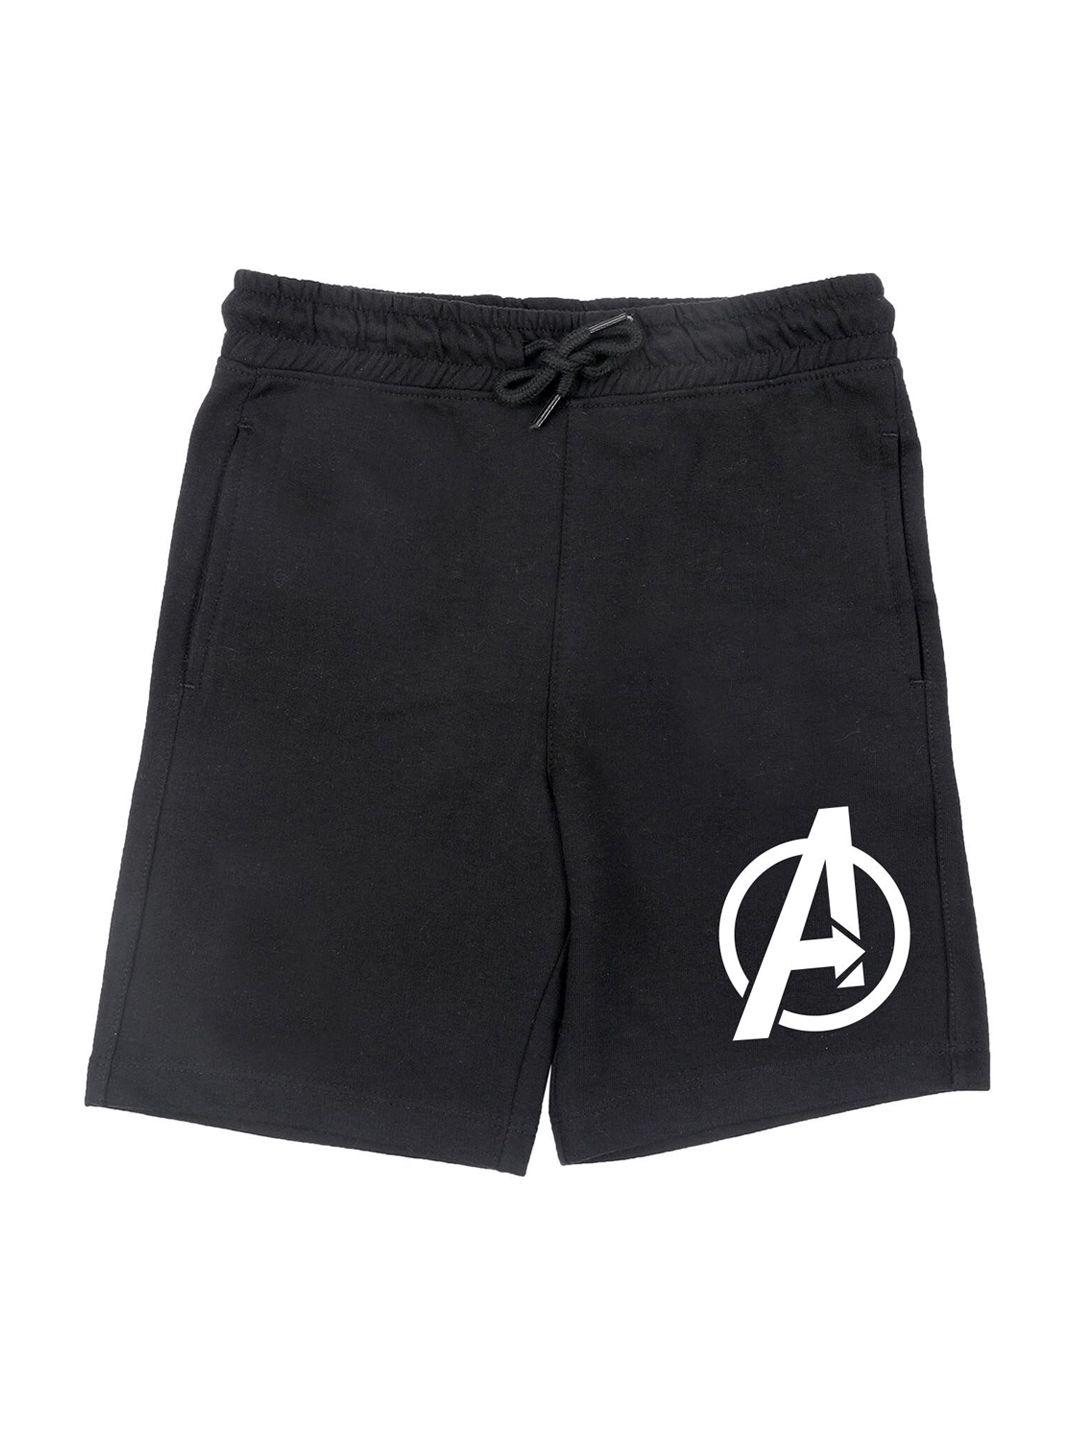 marvel by wear your mind boys black avenger graphic print shorts